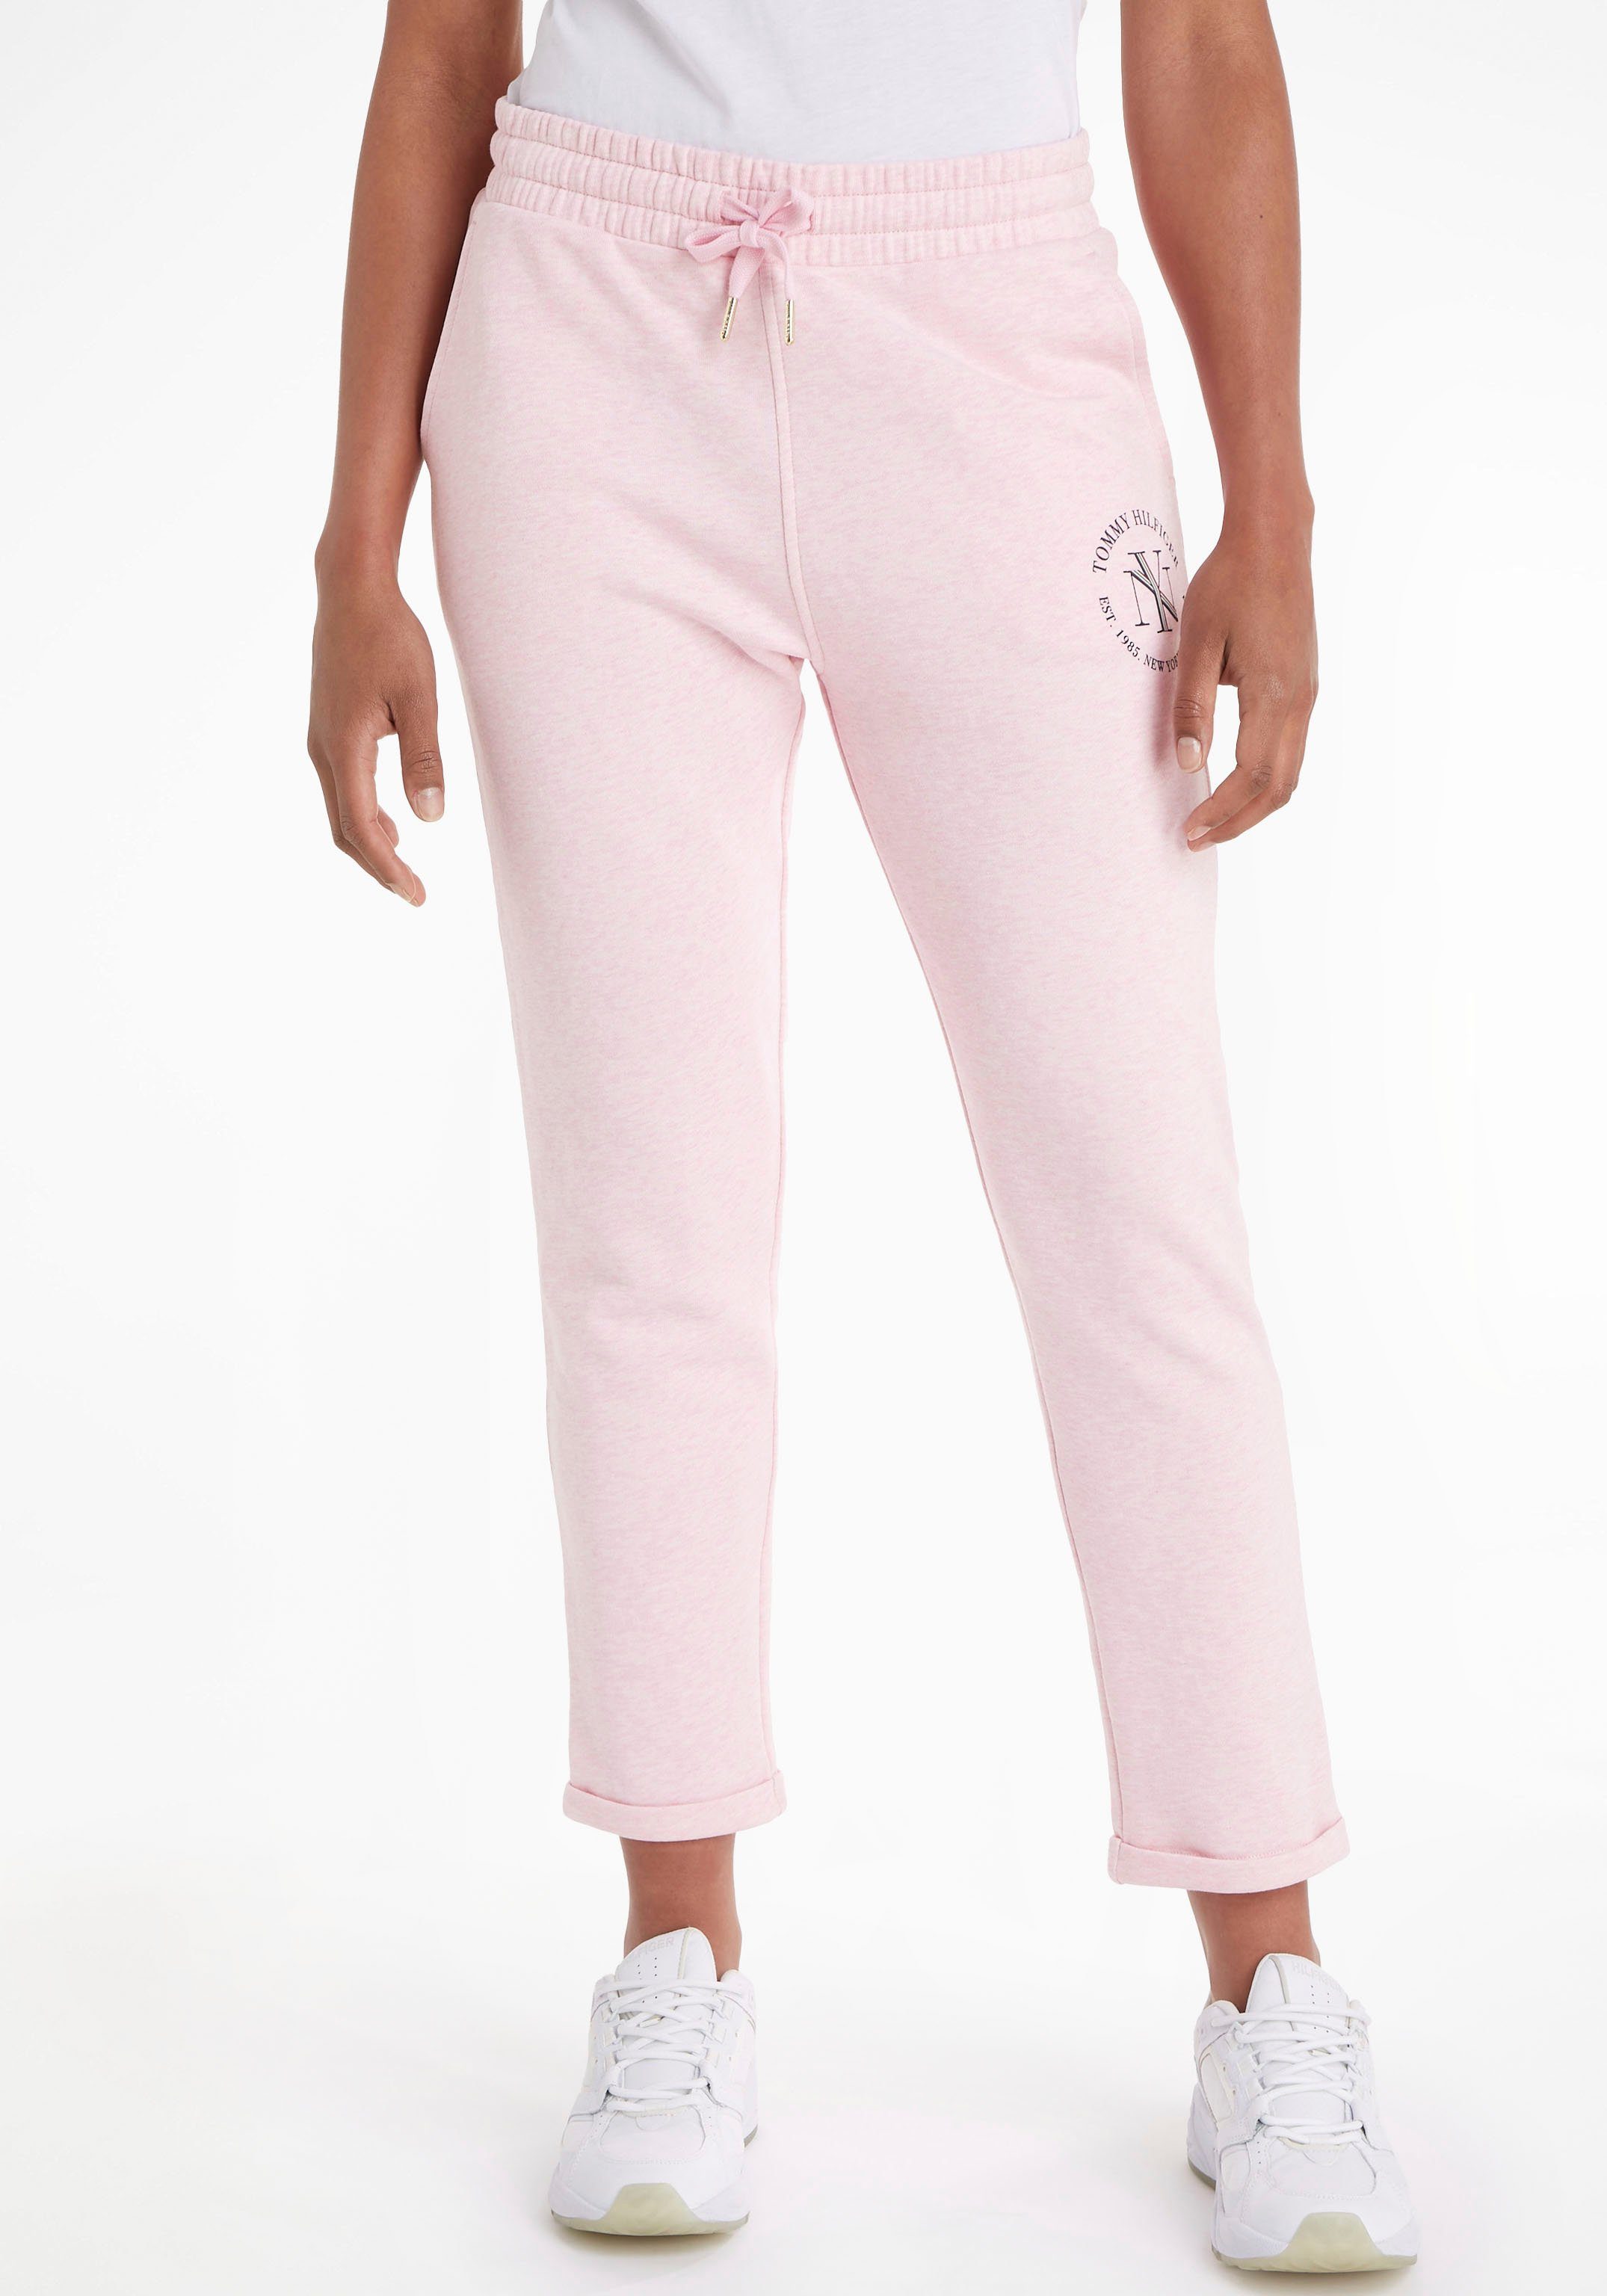 Tommy Hilfiger Sweatpants TAPERED NYC ROUNDALL SWEATPANTS mit Tommy Hilfiger Markenlabel Classic-Pink-Heather